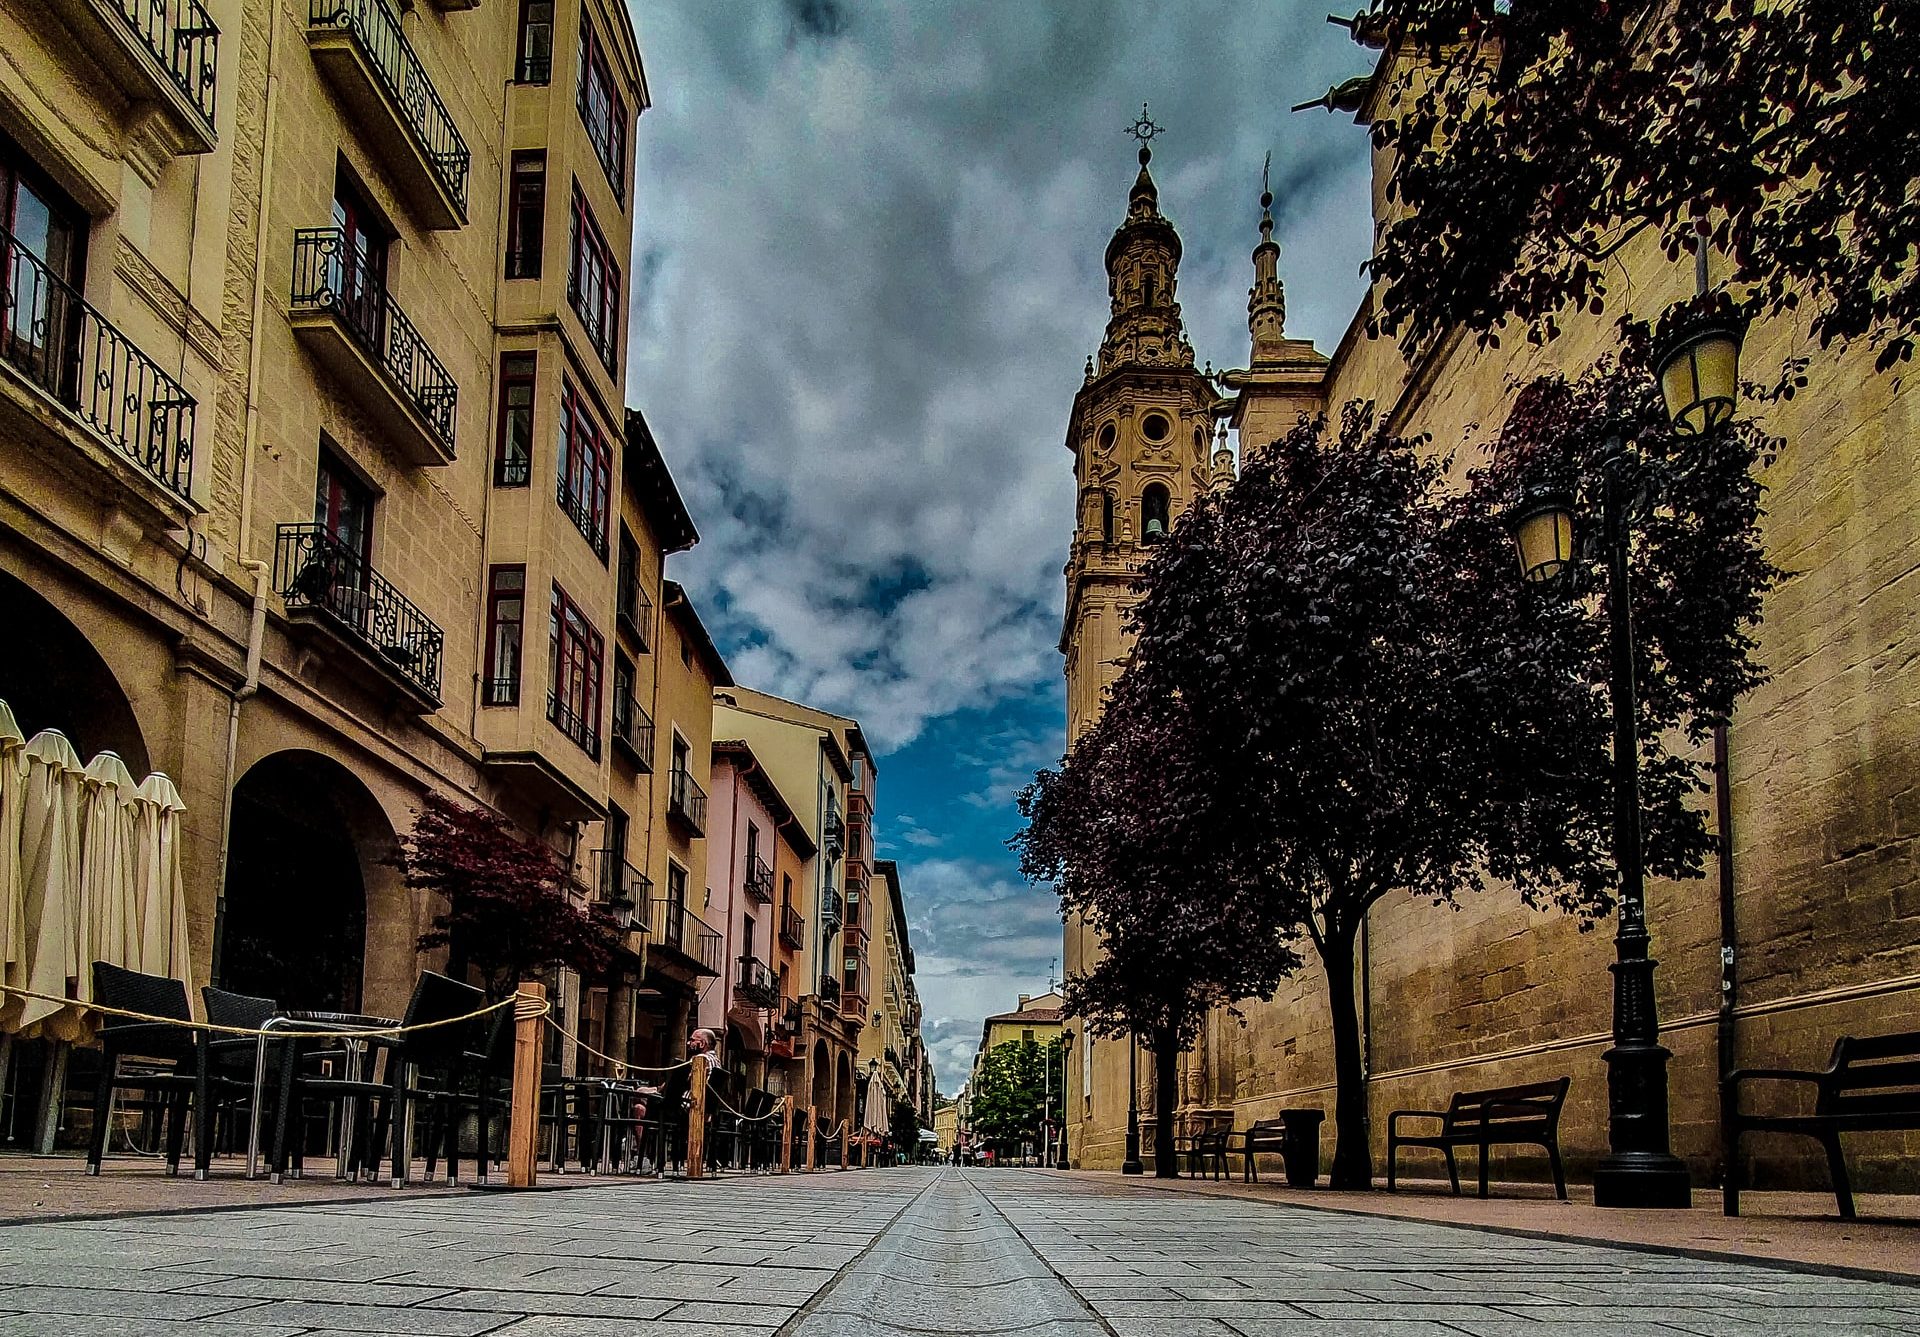 Check out the city of Logrono